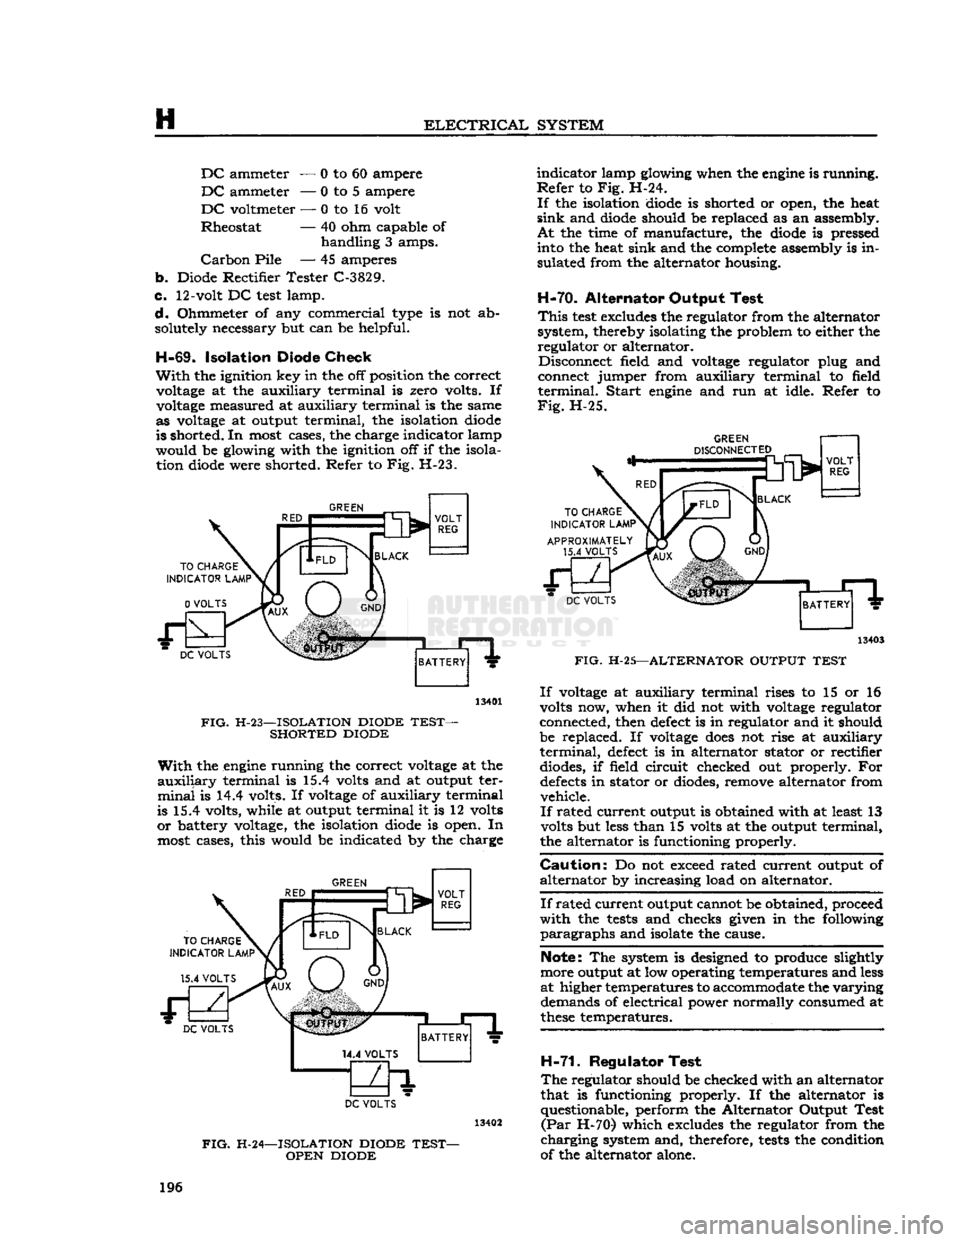 JEEP DJ 1953  Service Manual 
H 

ELECTRICAL
 SYSTEM DC
 ammeter — 0 to 60 ampere 

DC
 ammeter — 0 to 5 ampere 

DC
 voltmeter — 0 to 16 volt 
Rheostat — 40 ohm capable of 
 handling
 3 amps. 

Carbon
 Pile — 45 ampere